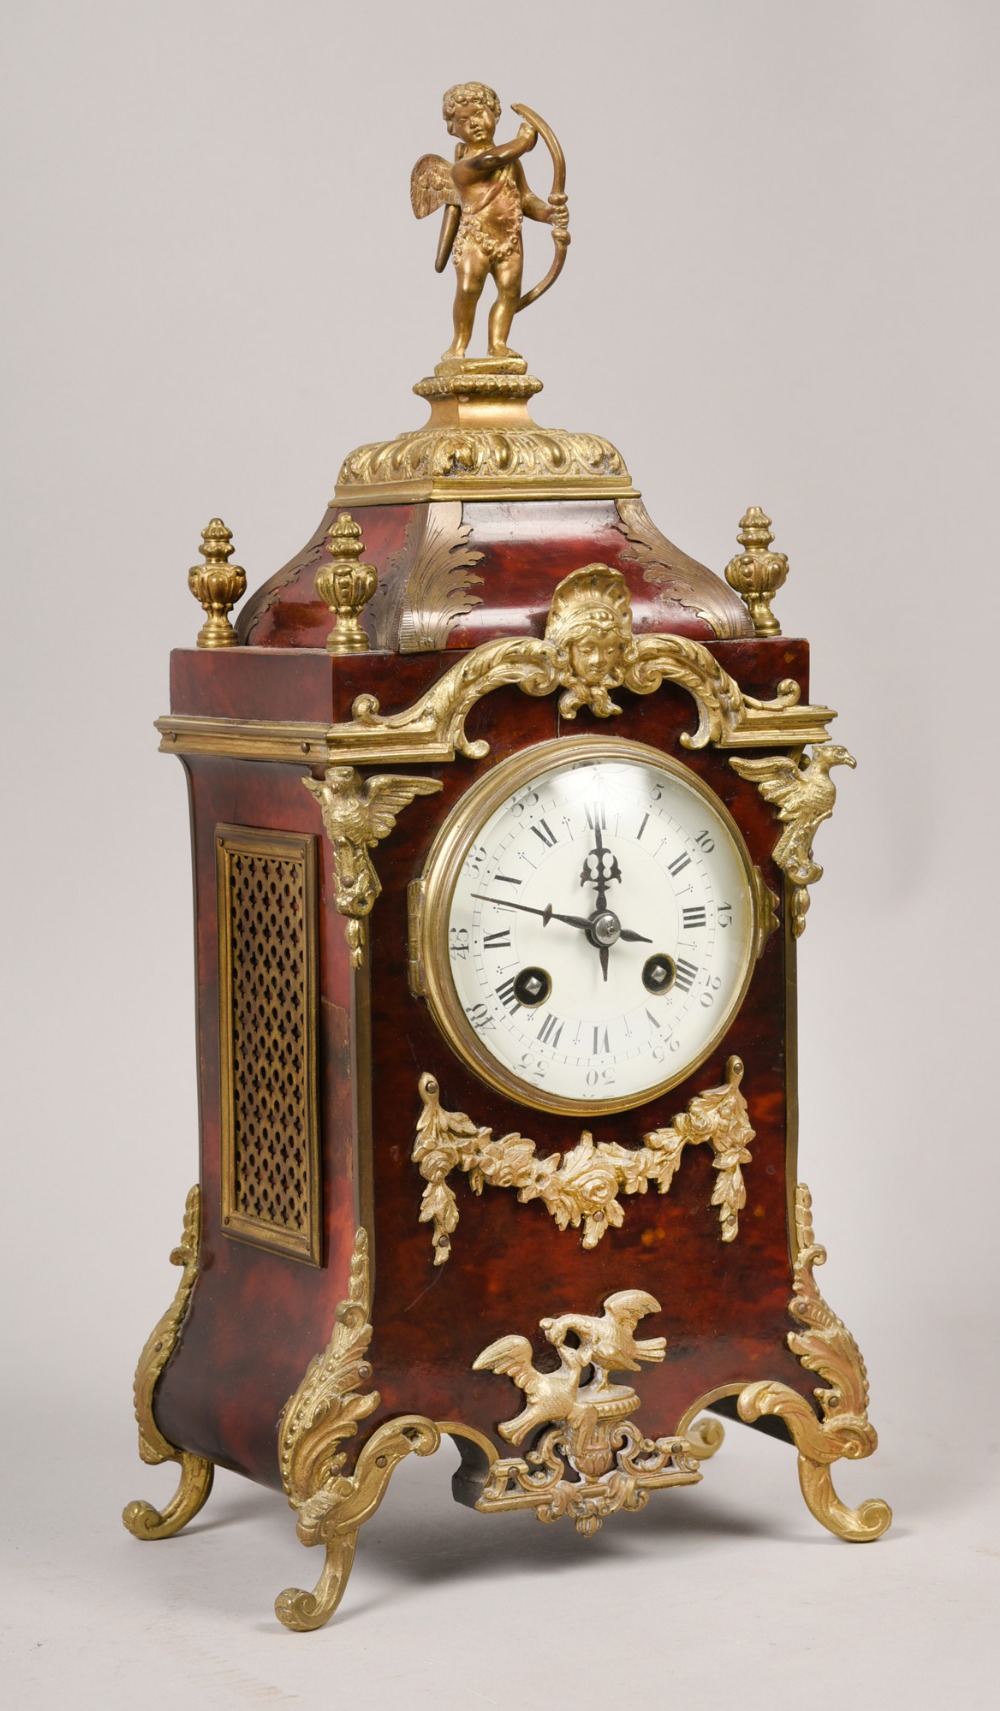 A late 19c French mantel clock in tortoiseshell case with cast gilt mounts and feet. The case